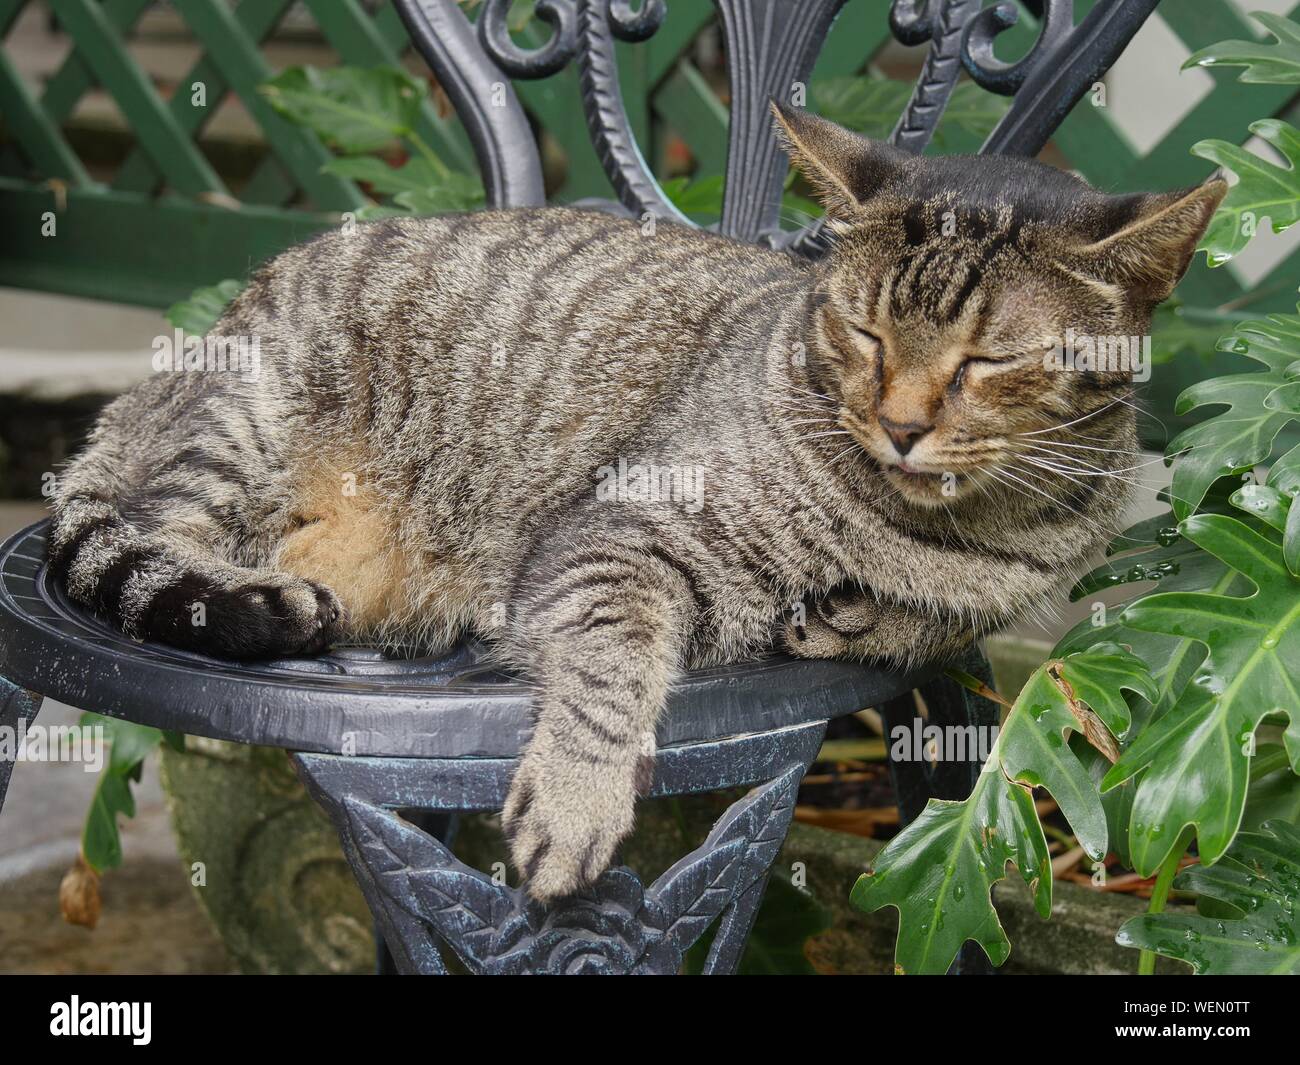 Medium close up of a tabby cat napping in a steel chair at the Hemingway house gardens in Key West, Florida. Stock Photo